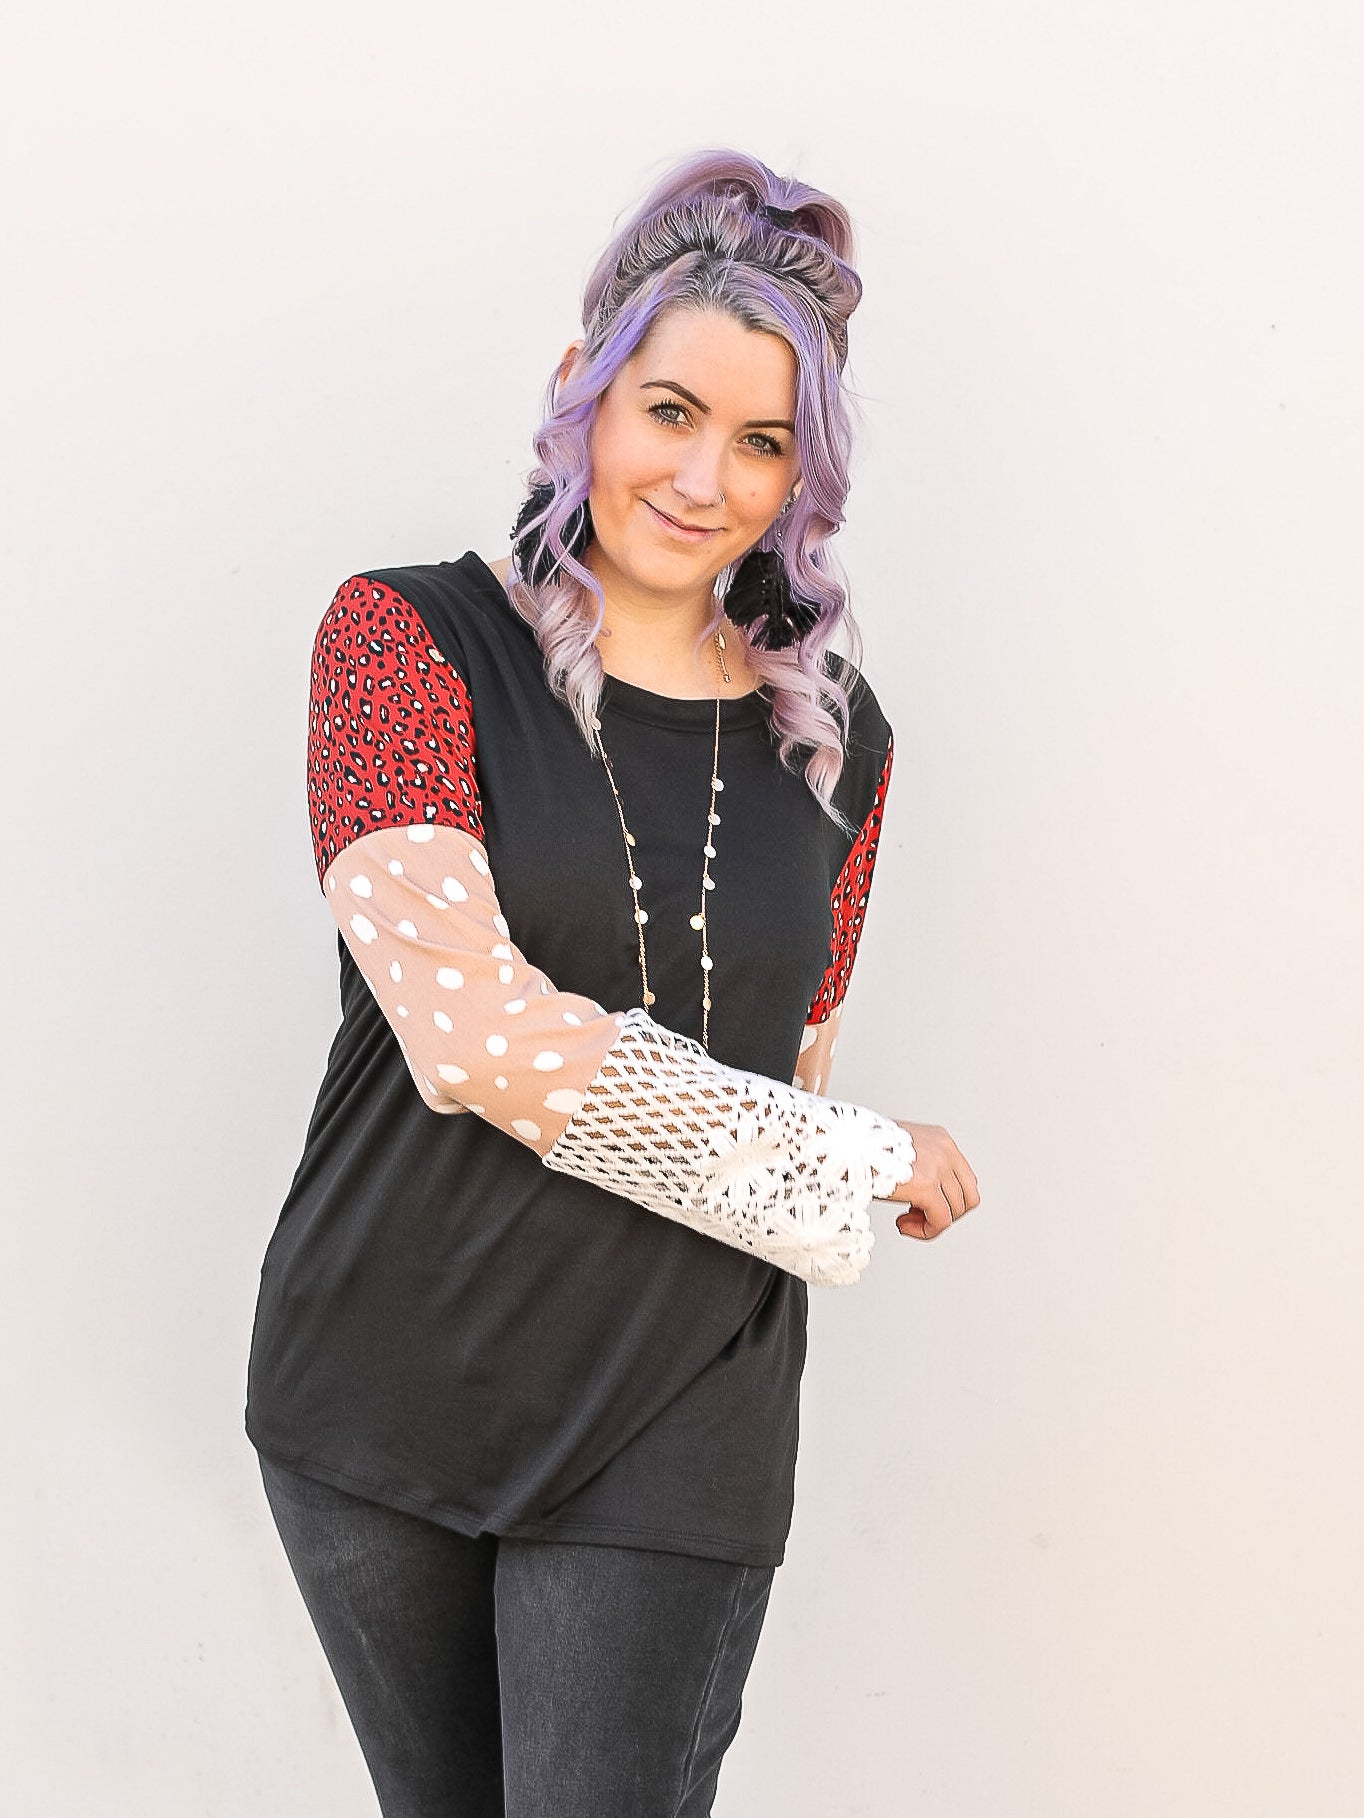 Black long sleeve with colored blocked sleeves in leopard, pok a dot and knit details.